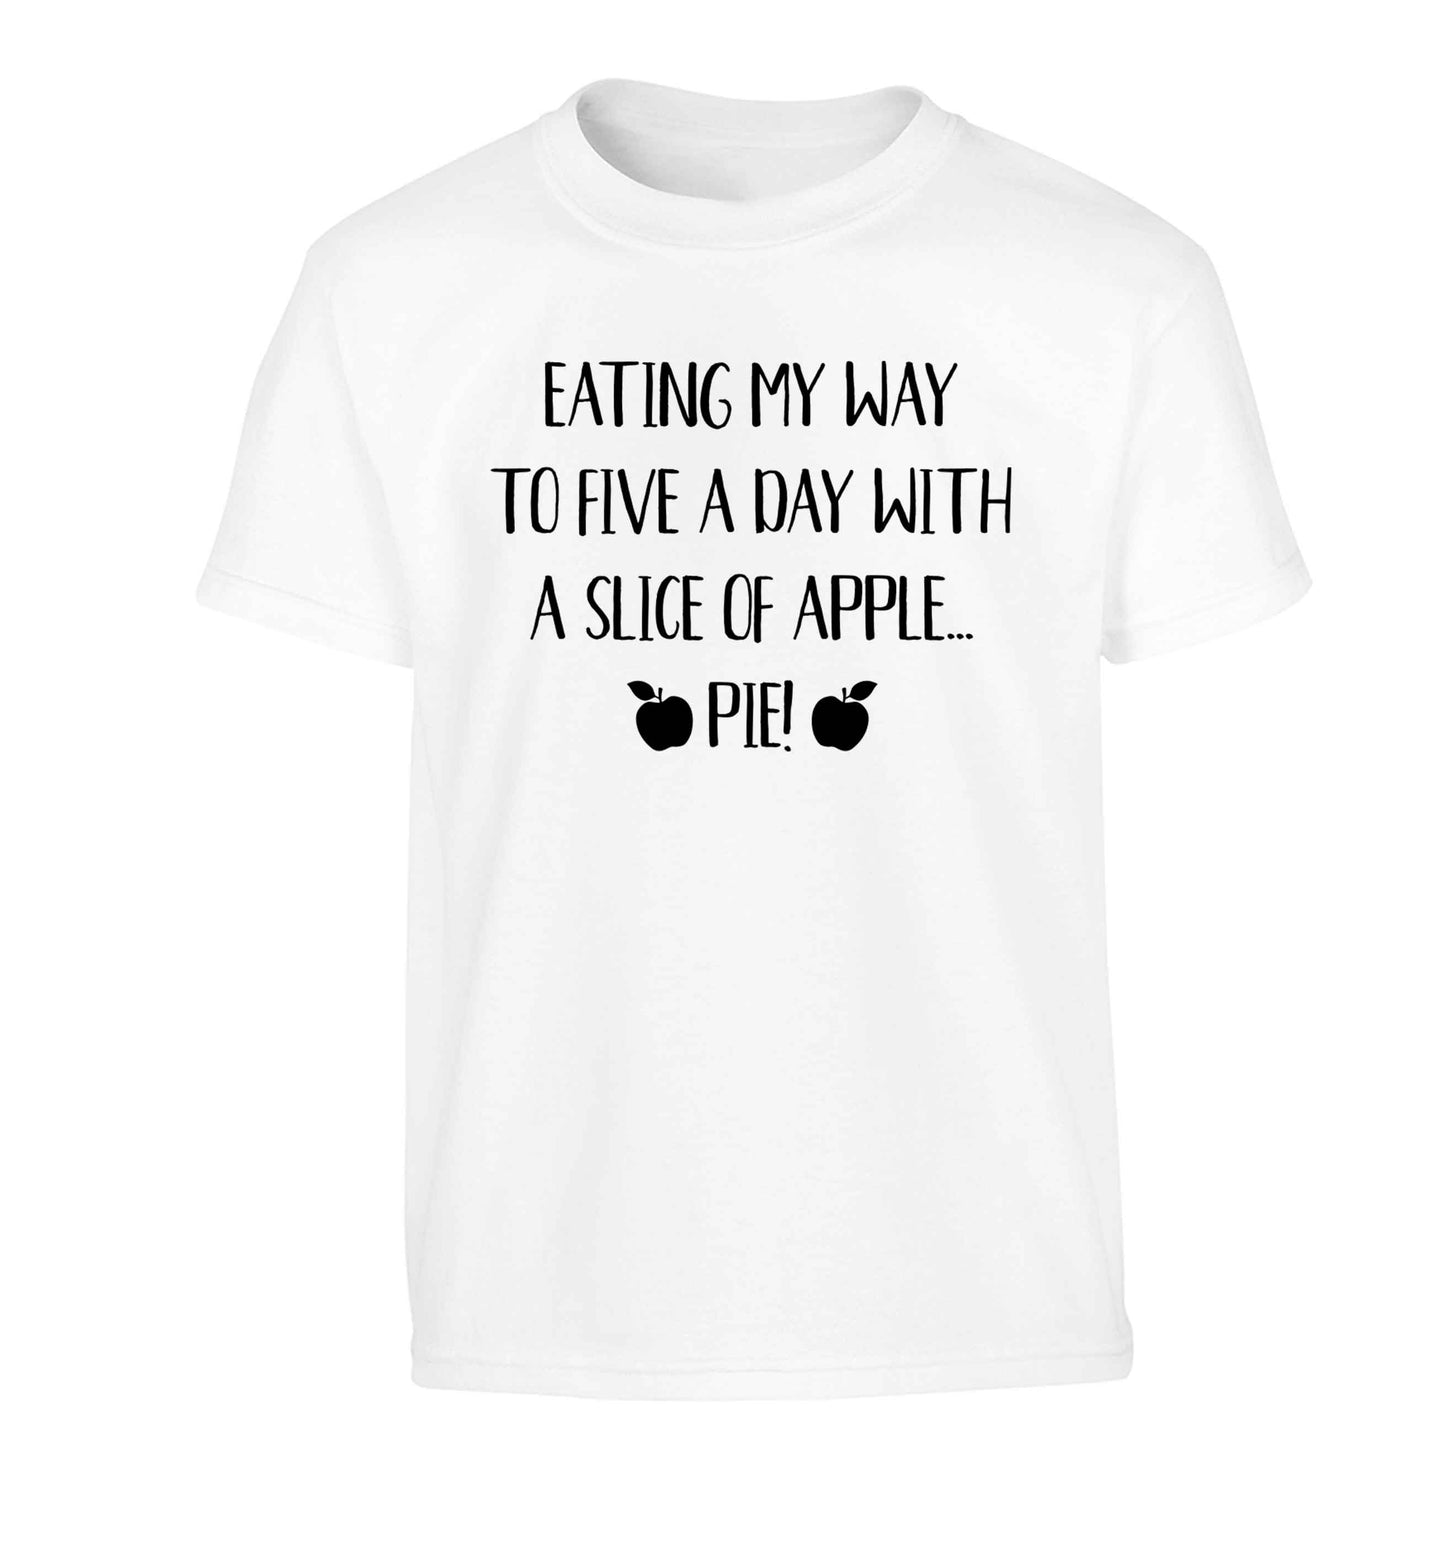 Eating my way to five a day with a slice of apple pie Children's white Tshirt 12-13 Years